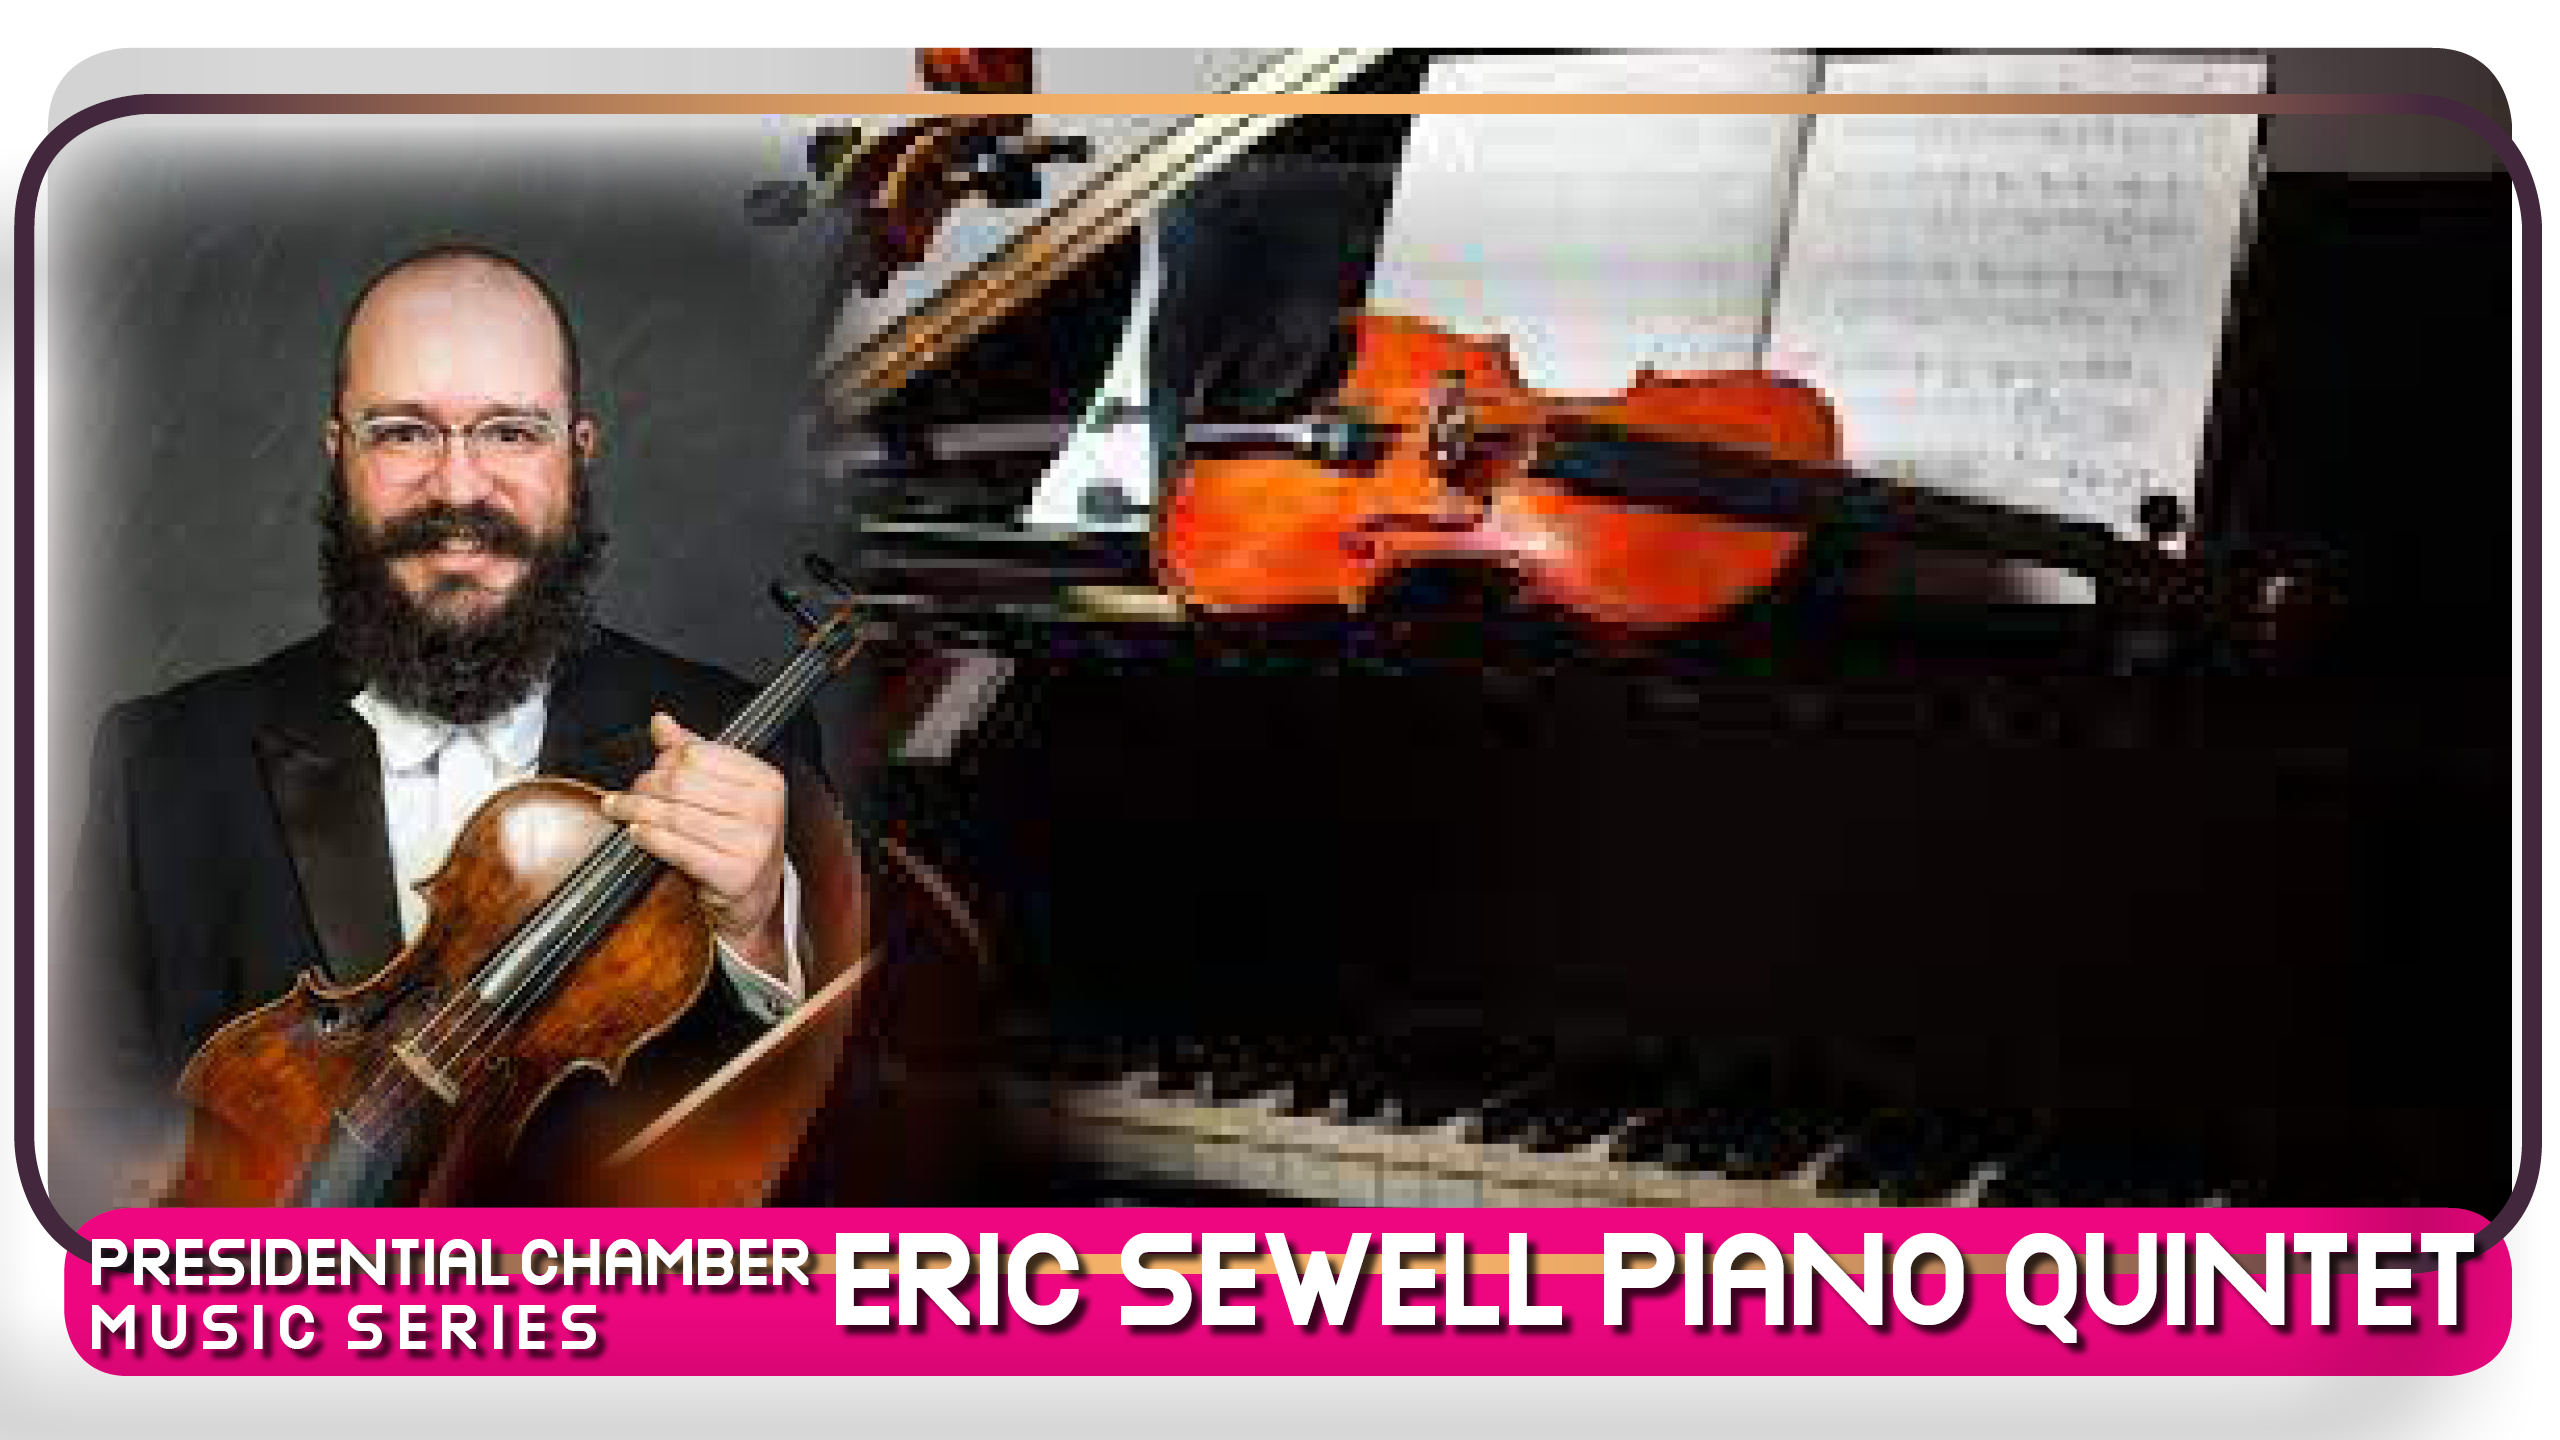 Eric Sewell Piano Quintet